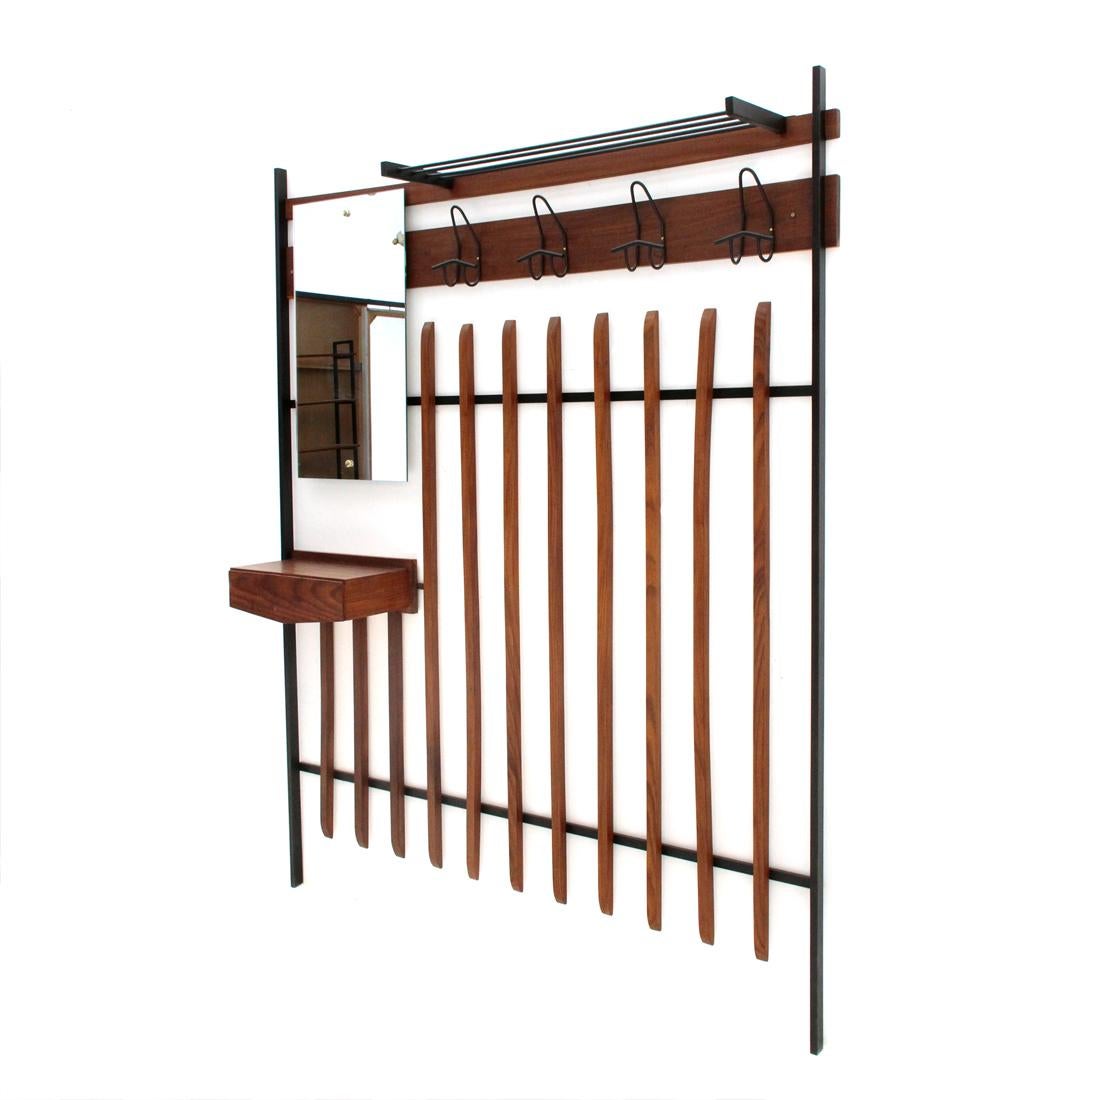 Italian-made clothes hanger produced in the 1960s.
Structure in black painted metal.
Horizontal panels and shelf with drawer in veneered wood.
Vertical strips in solid wood.
Mirror with brass studs.
Hooks in black painted metal.
Good general